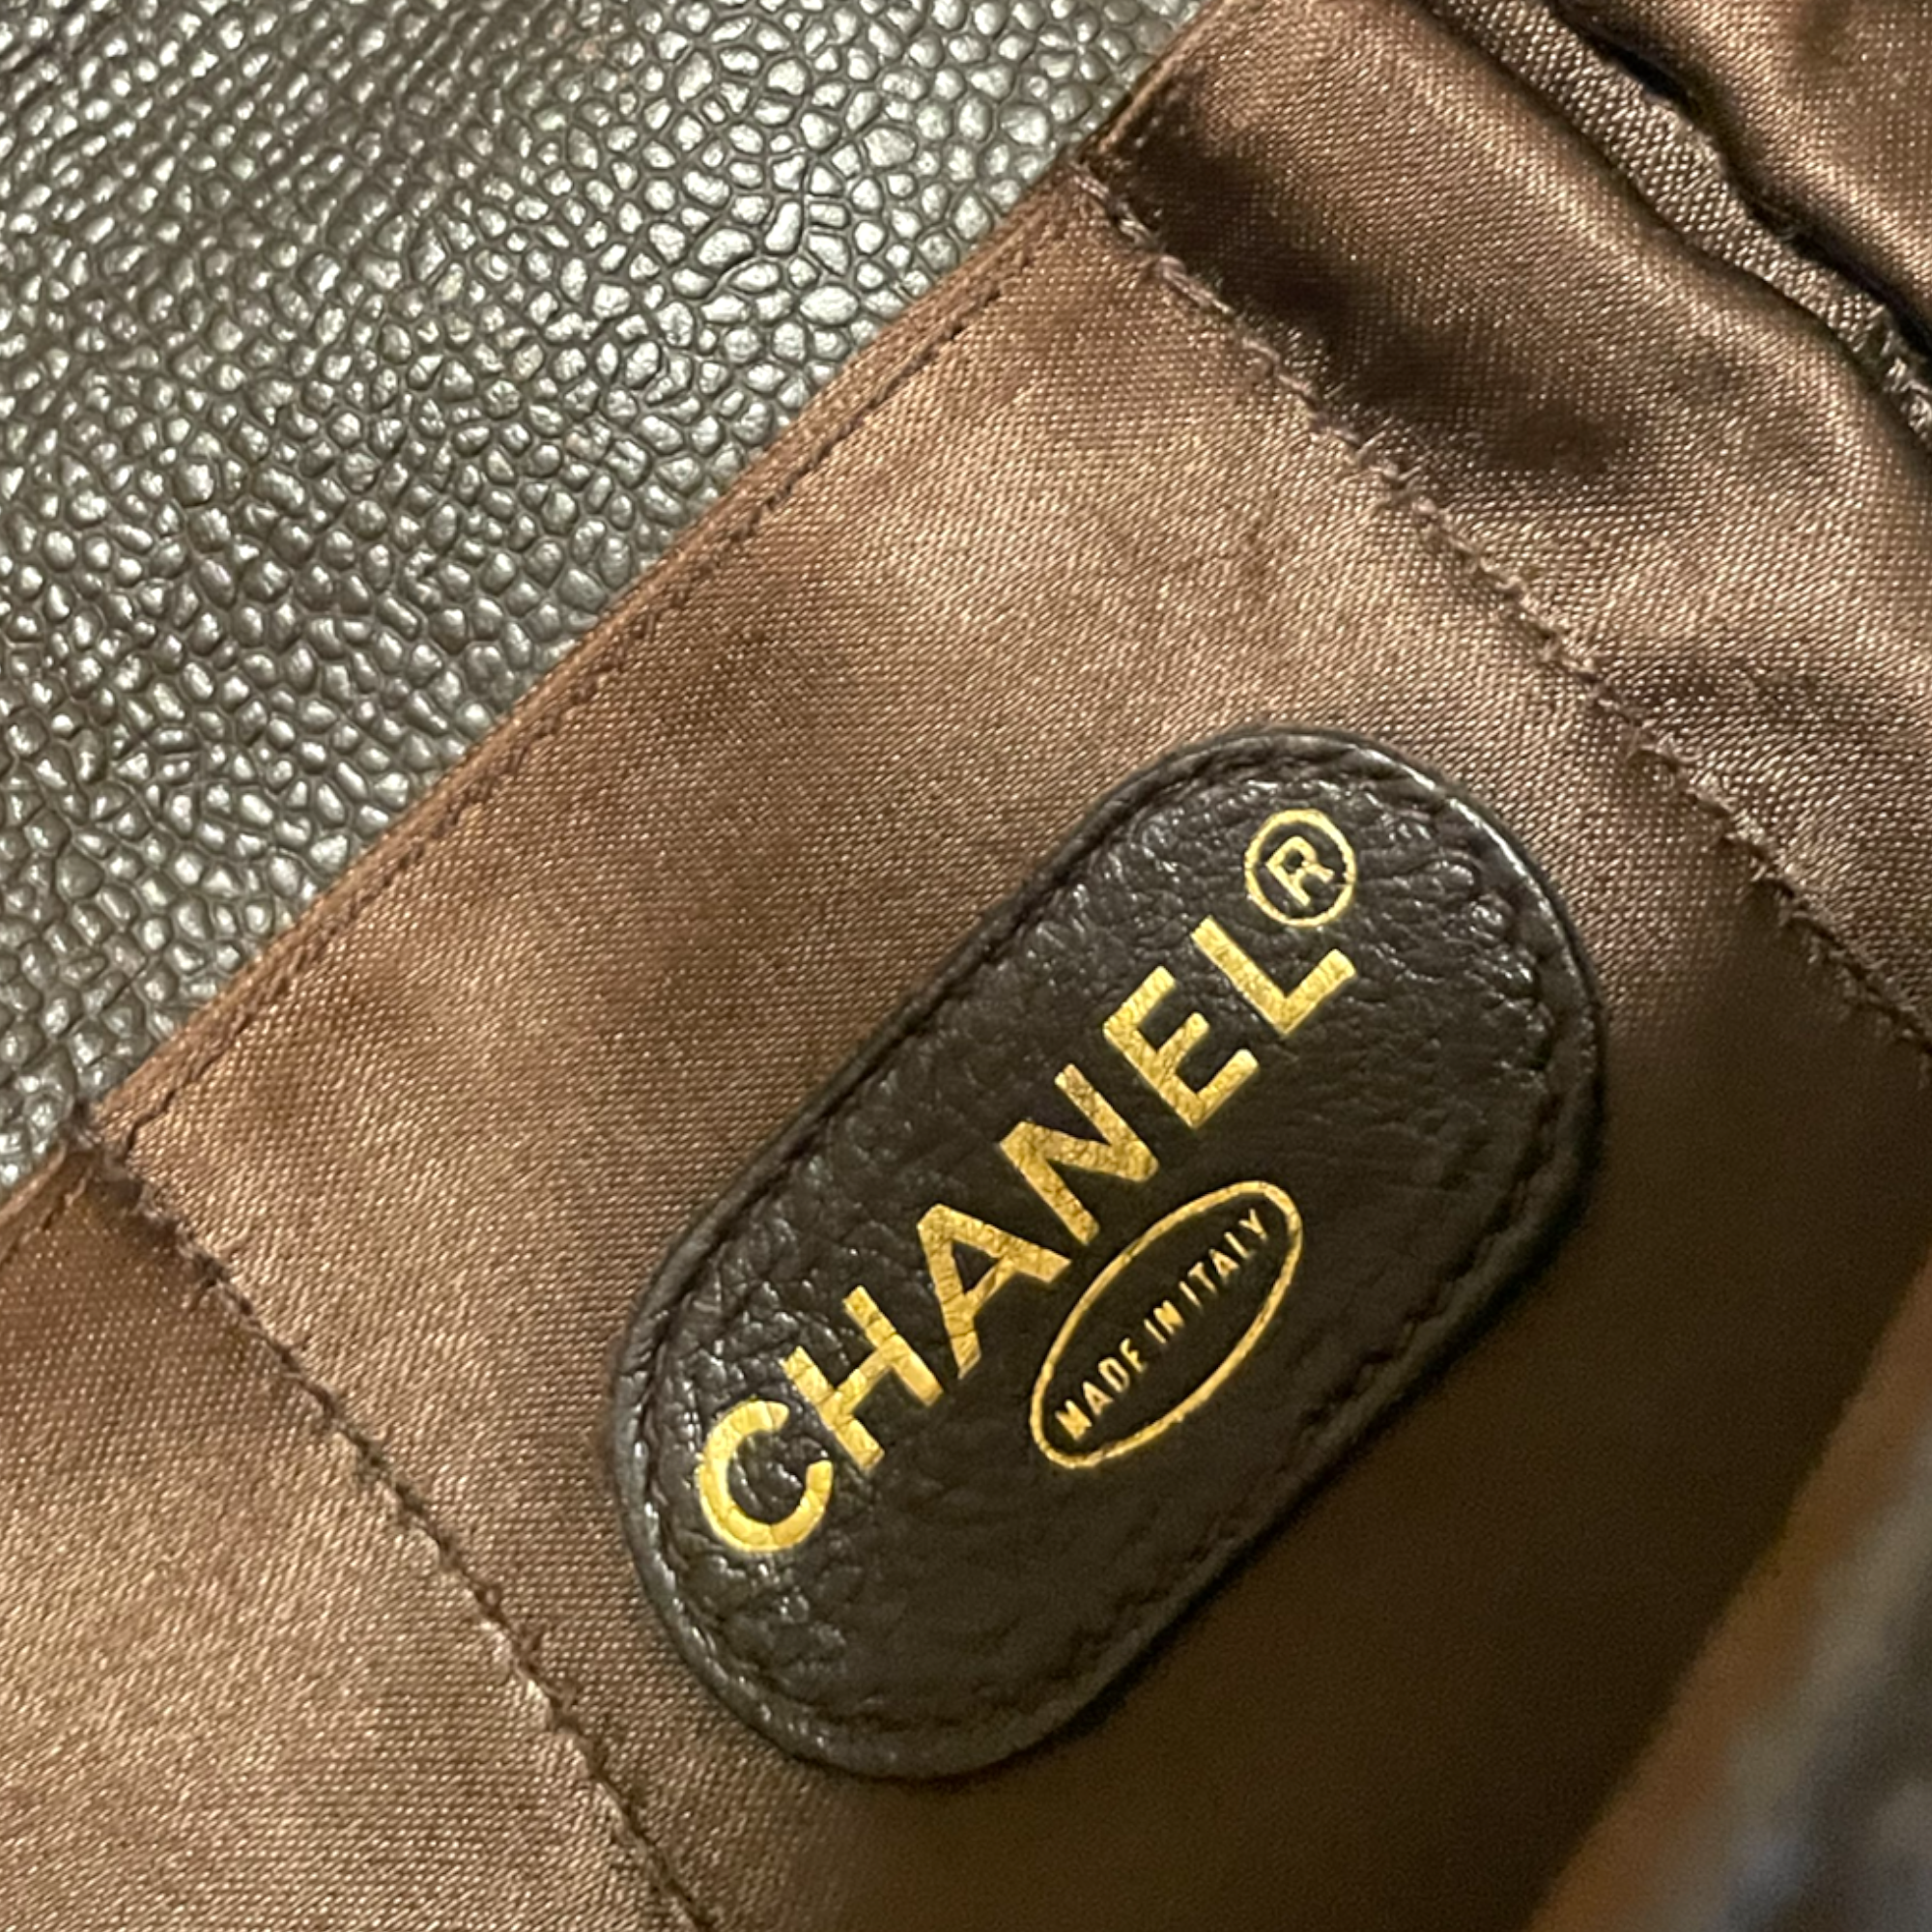 CHANEL Vintage Brown Caviar Leather Briefcase with Gold 'CHANEL' Logo Clasp